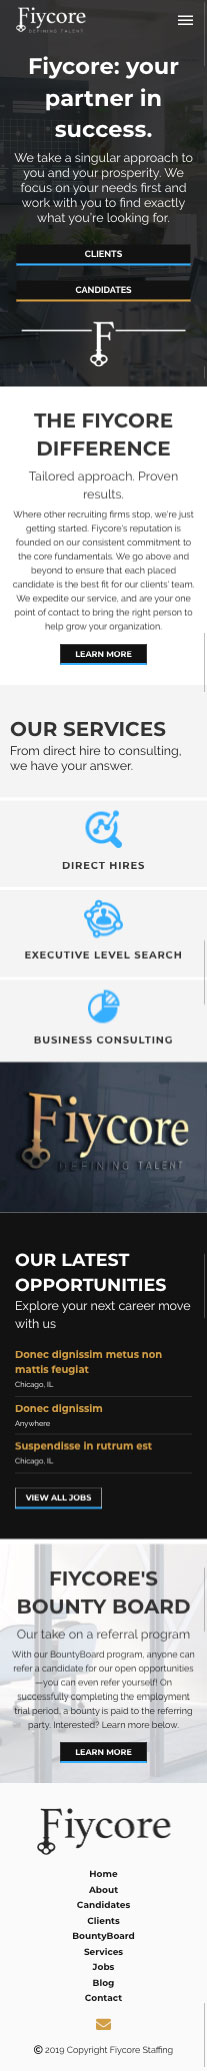 Fiycore Staffing